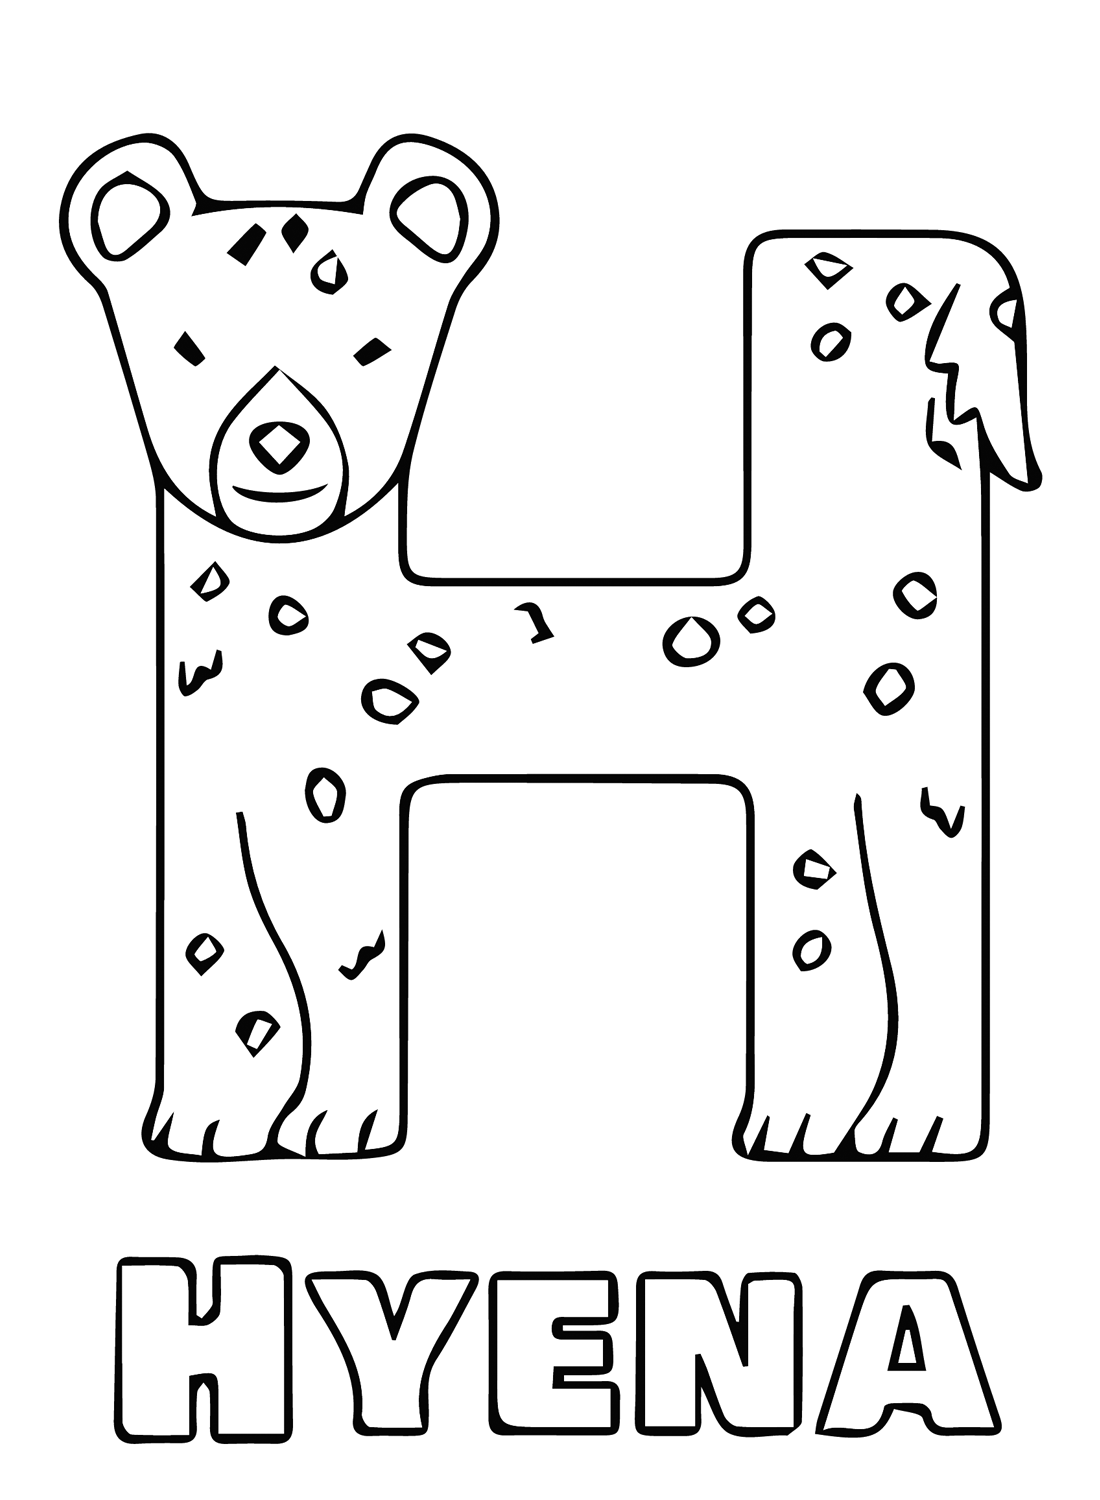 Draw Hyena Coloring Pages